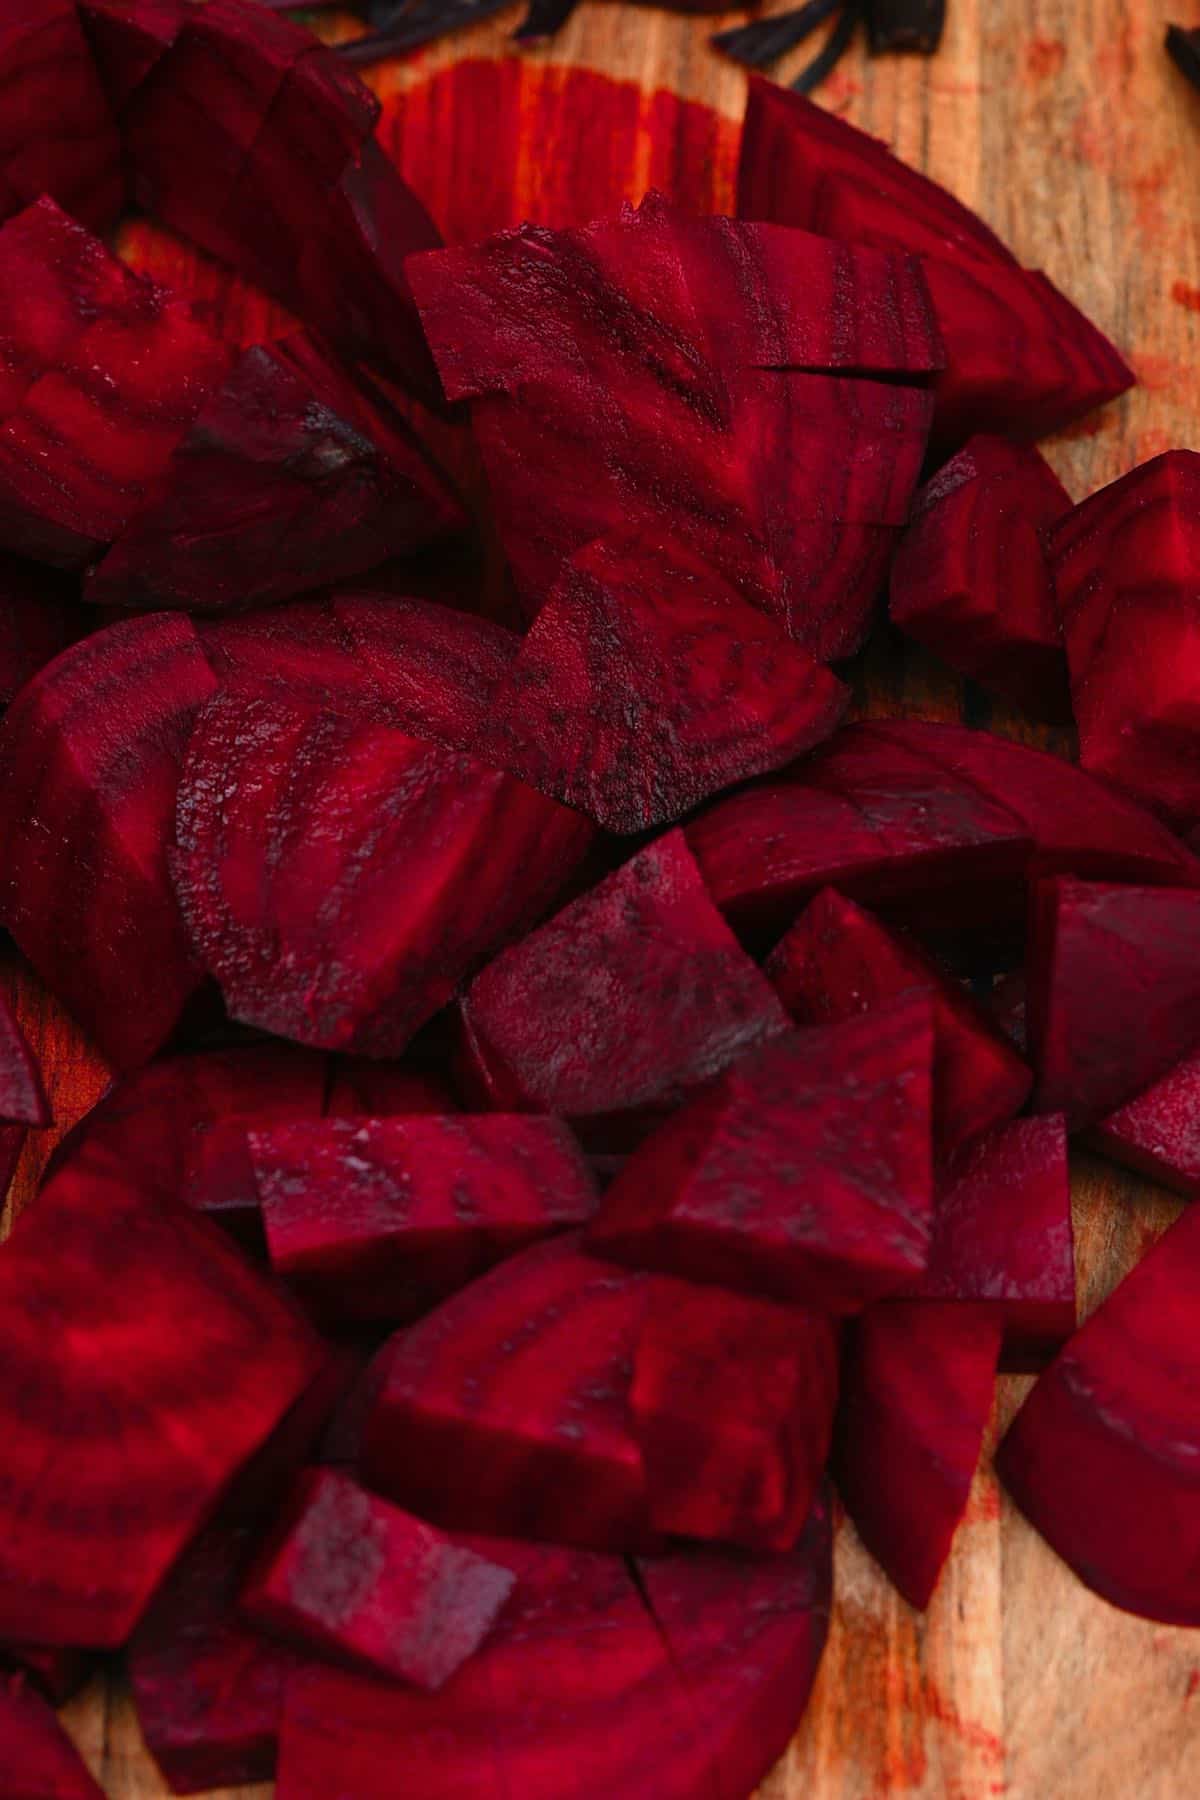 Chopped beetroot